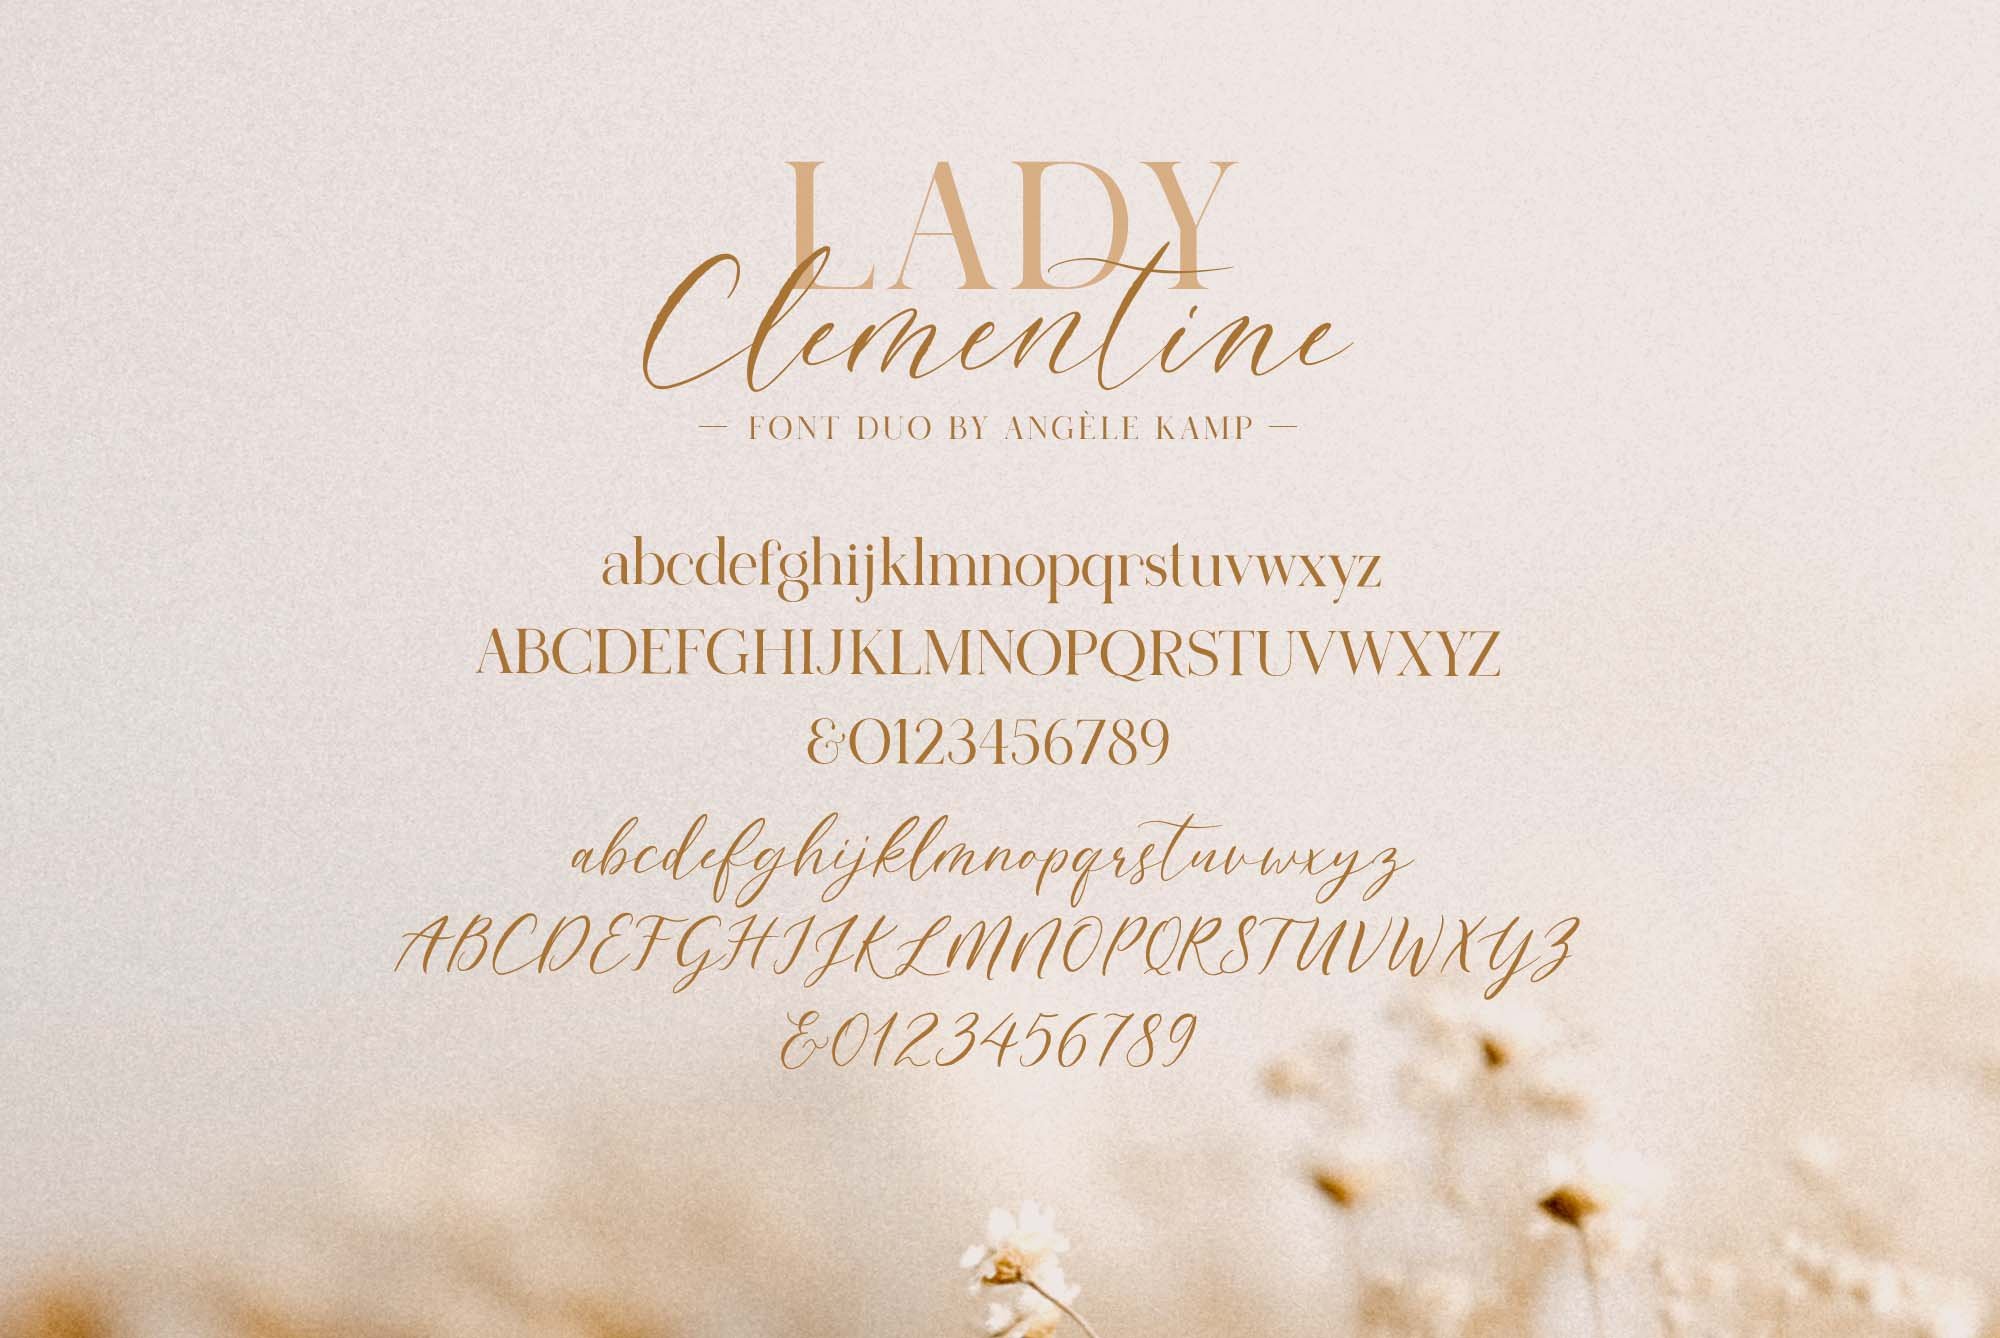 lady clementine modern calligraphy serif font duo 09 547